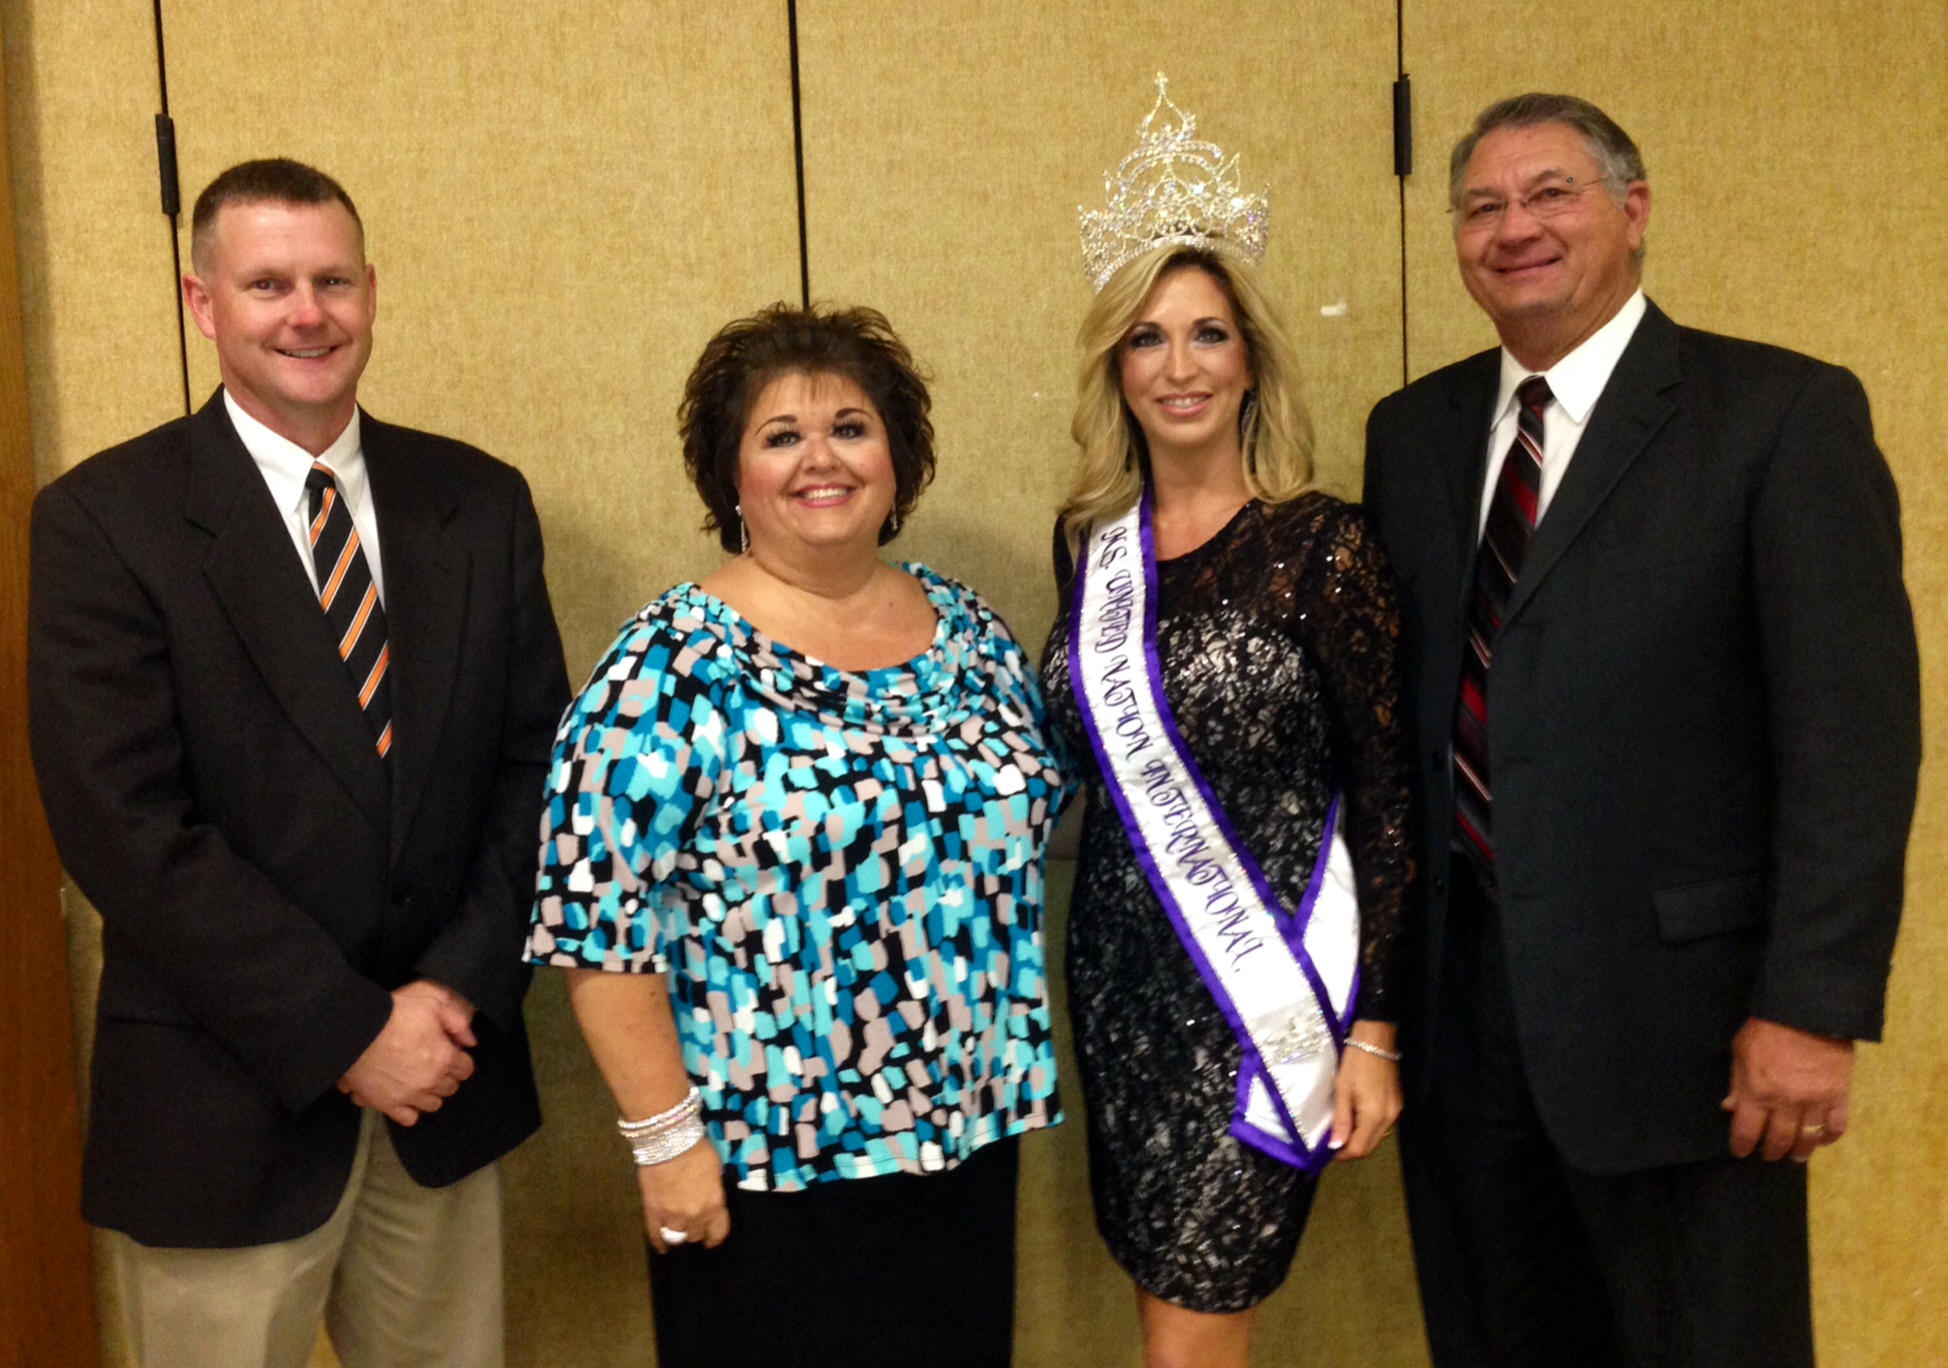 Idabel Chamber of Commerce banquet-speaking engagement. Left to right: Chamber Pres. Brad Bain, Mayor Tina Foshee-Thomas, Carla Gonzalez, Ms. United Nation International, State Rep. Curtis McDaniel